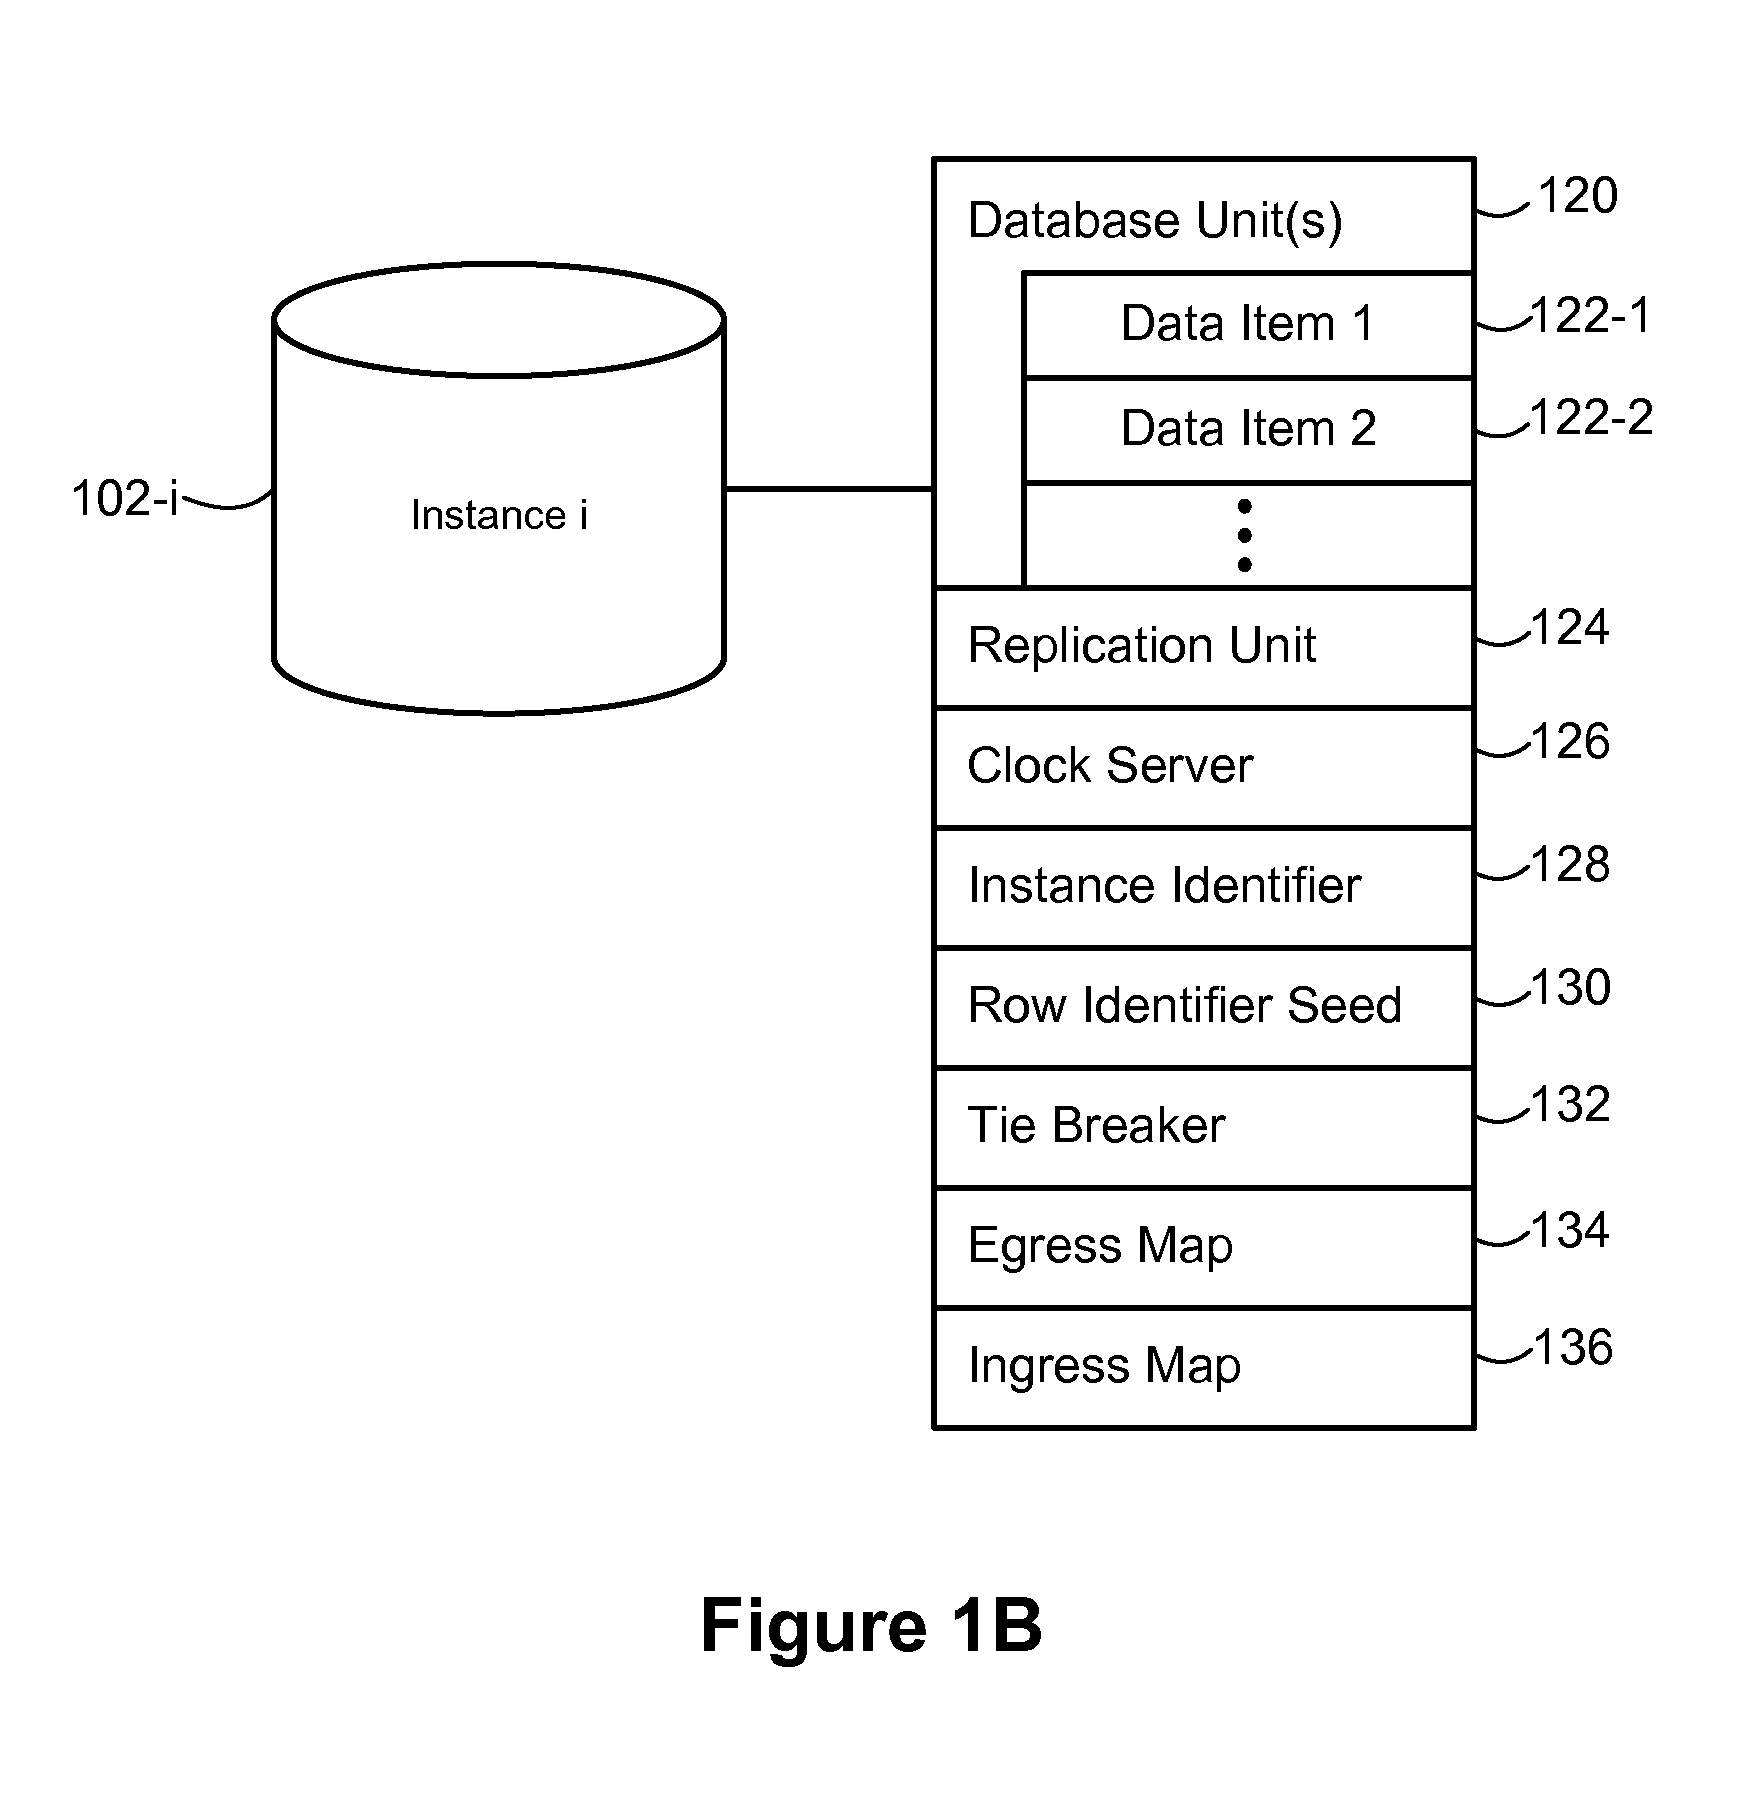 Method and system for dynamically replicating data within a distributed storage system